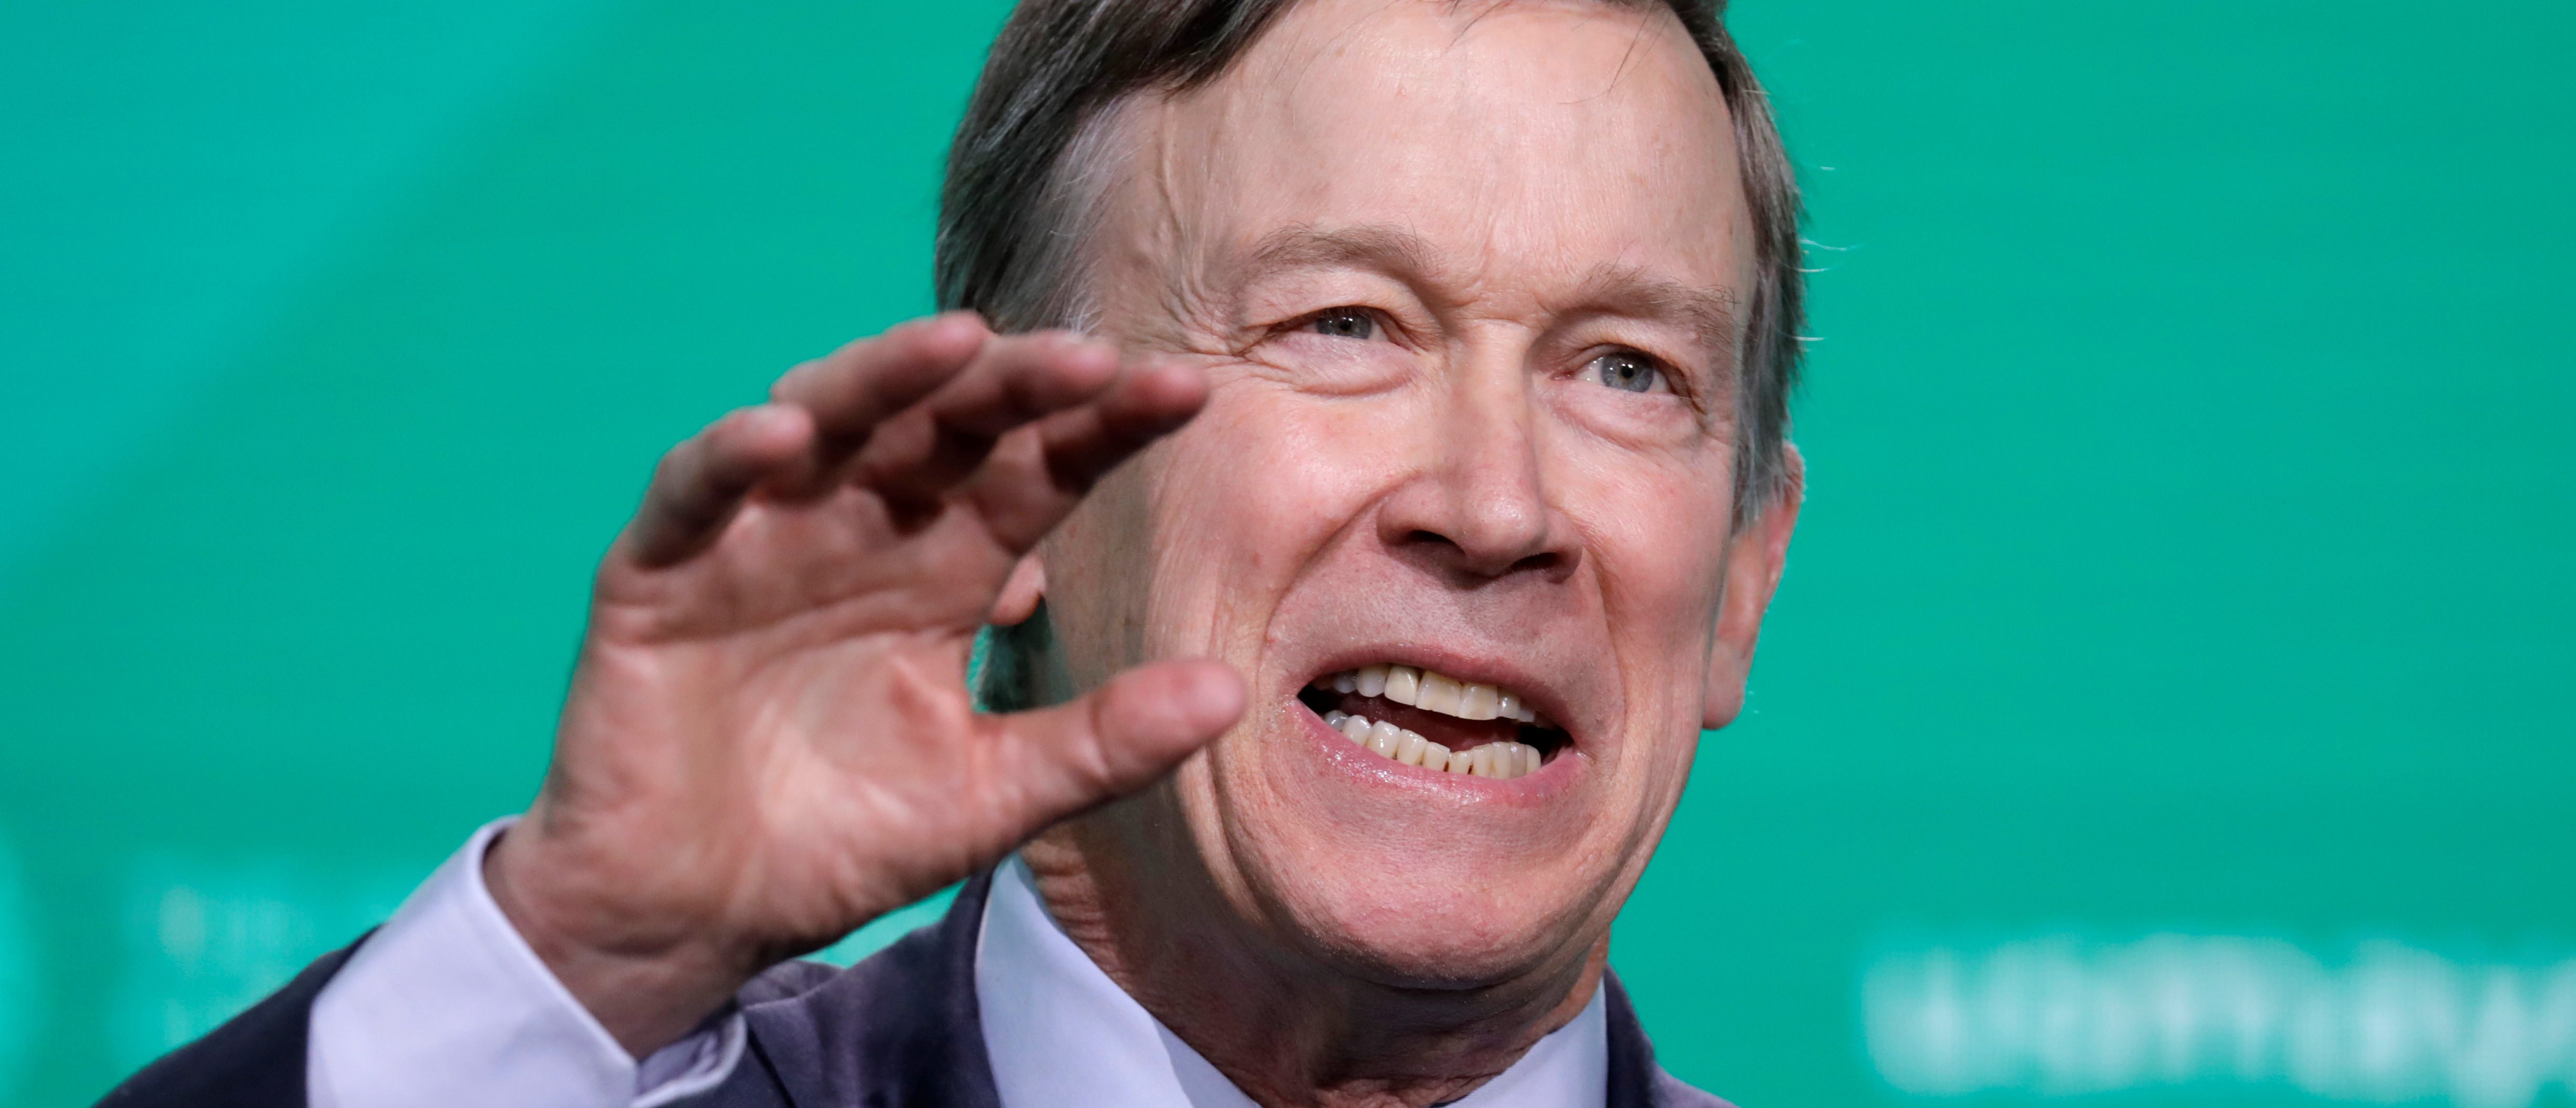 Former Gov. John Hickenlooper (D-CO) speaks at the United States Conference of Mayors winter meeting in Washington, U.S., January 24, 2019. REUTERS/Yuri Gripas.